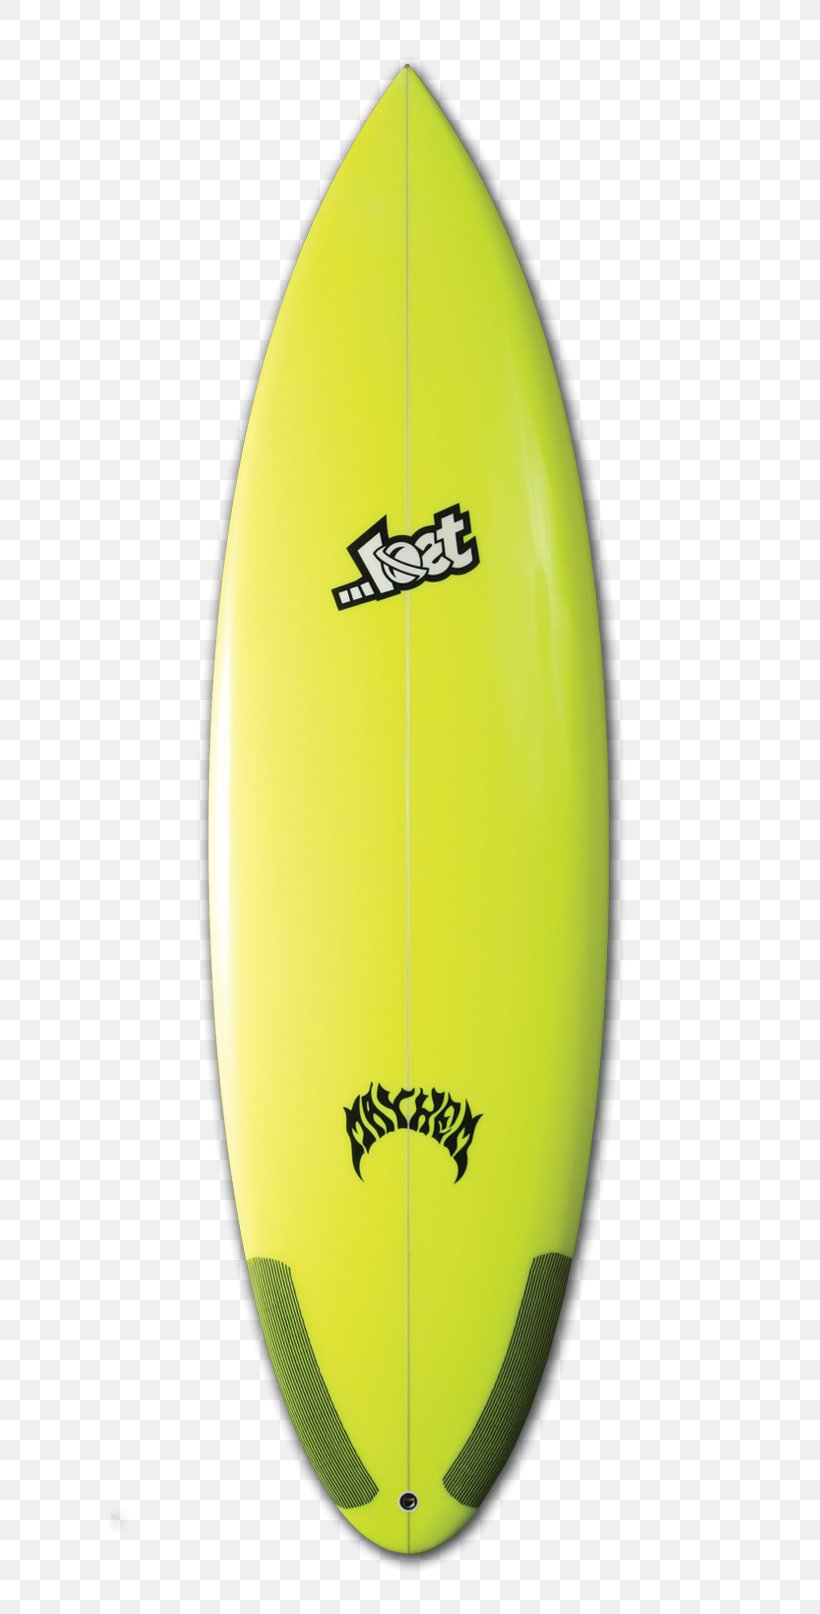 Surfboard Product Design Stable, PNG, 600x1614px, Surfboard, Brother, Online And Offline, Stable, Surfing Equipment And Supplies Download Free